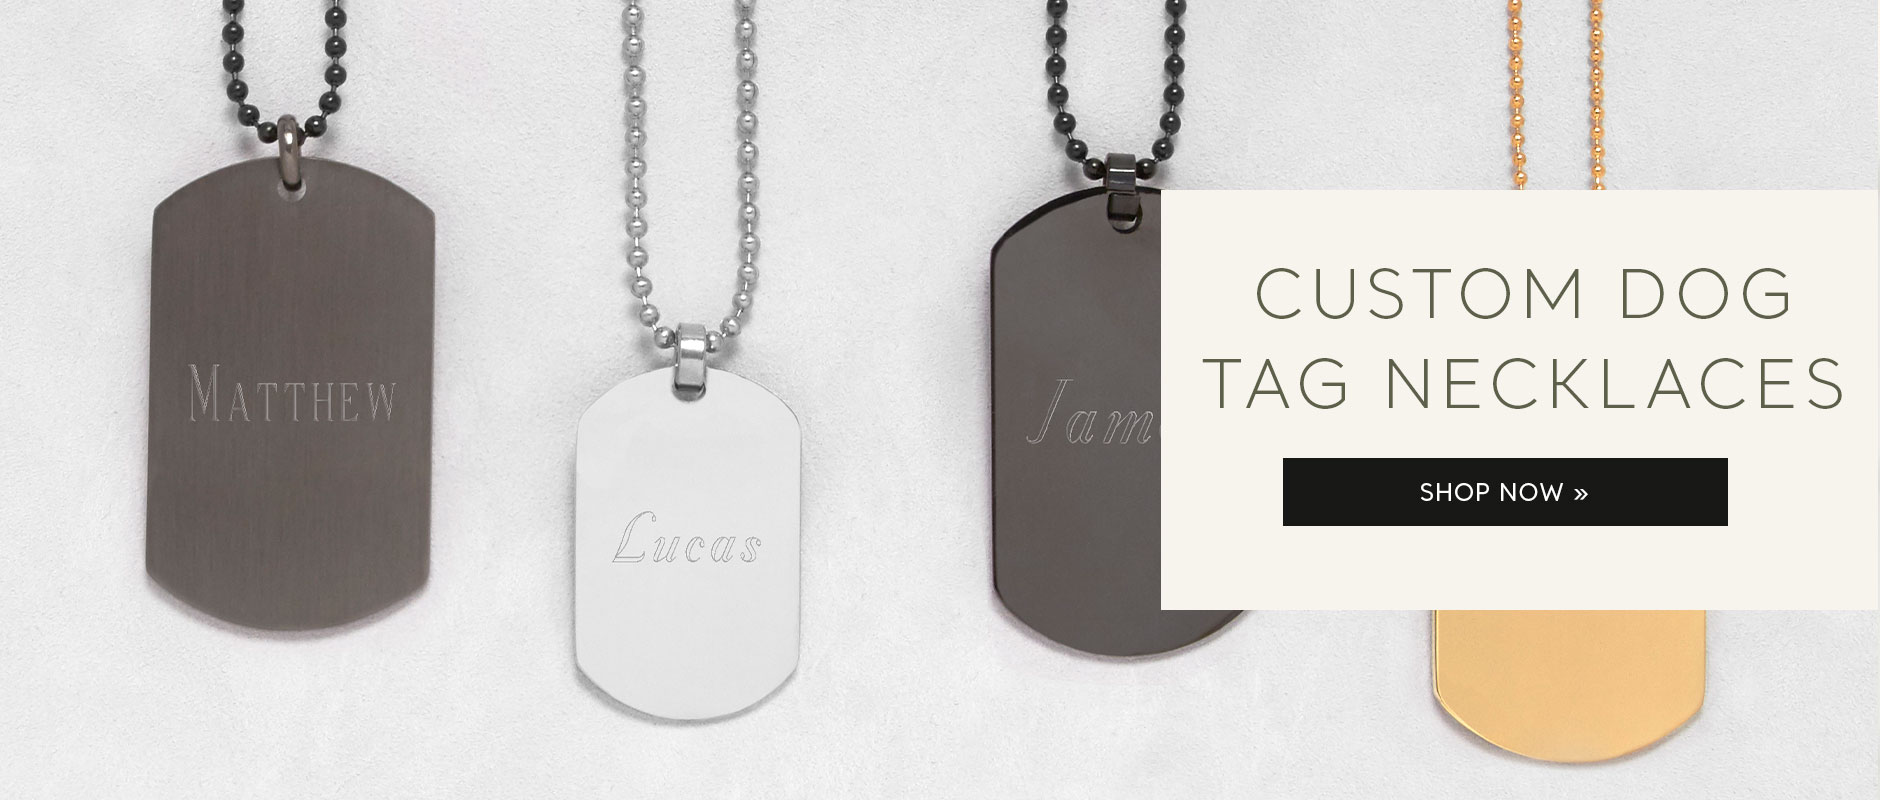 Custom Dog Tag Necklaces. Shop Now.